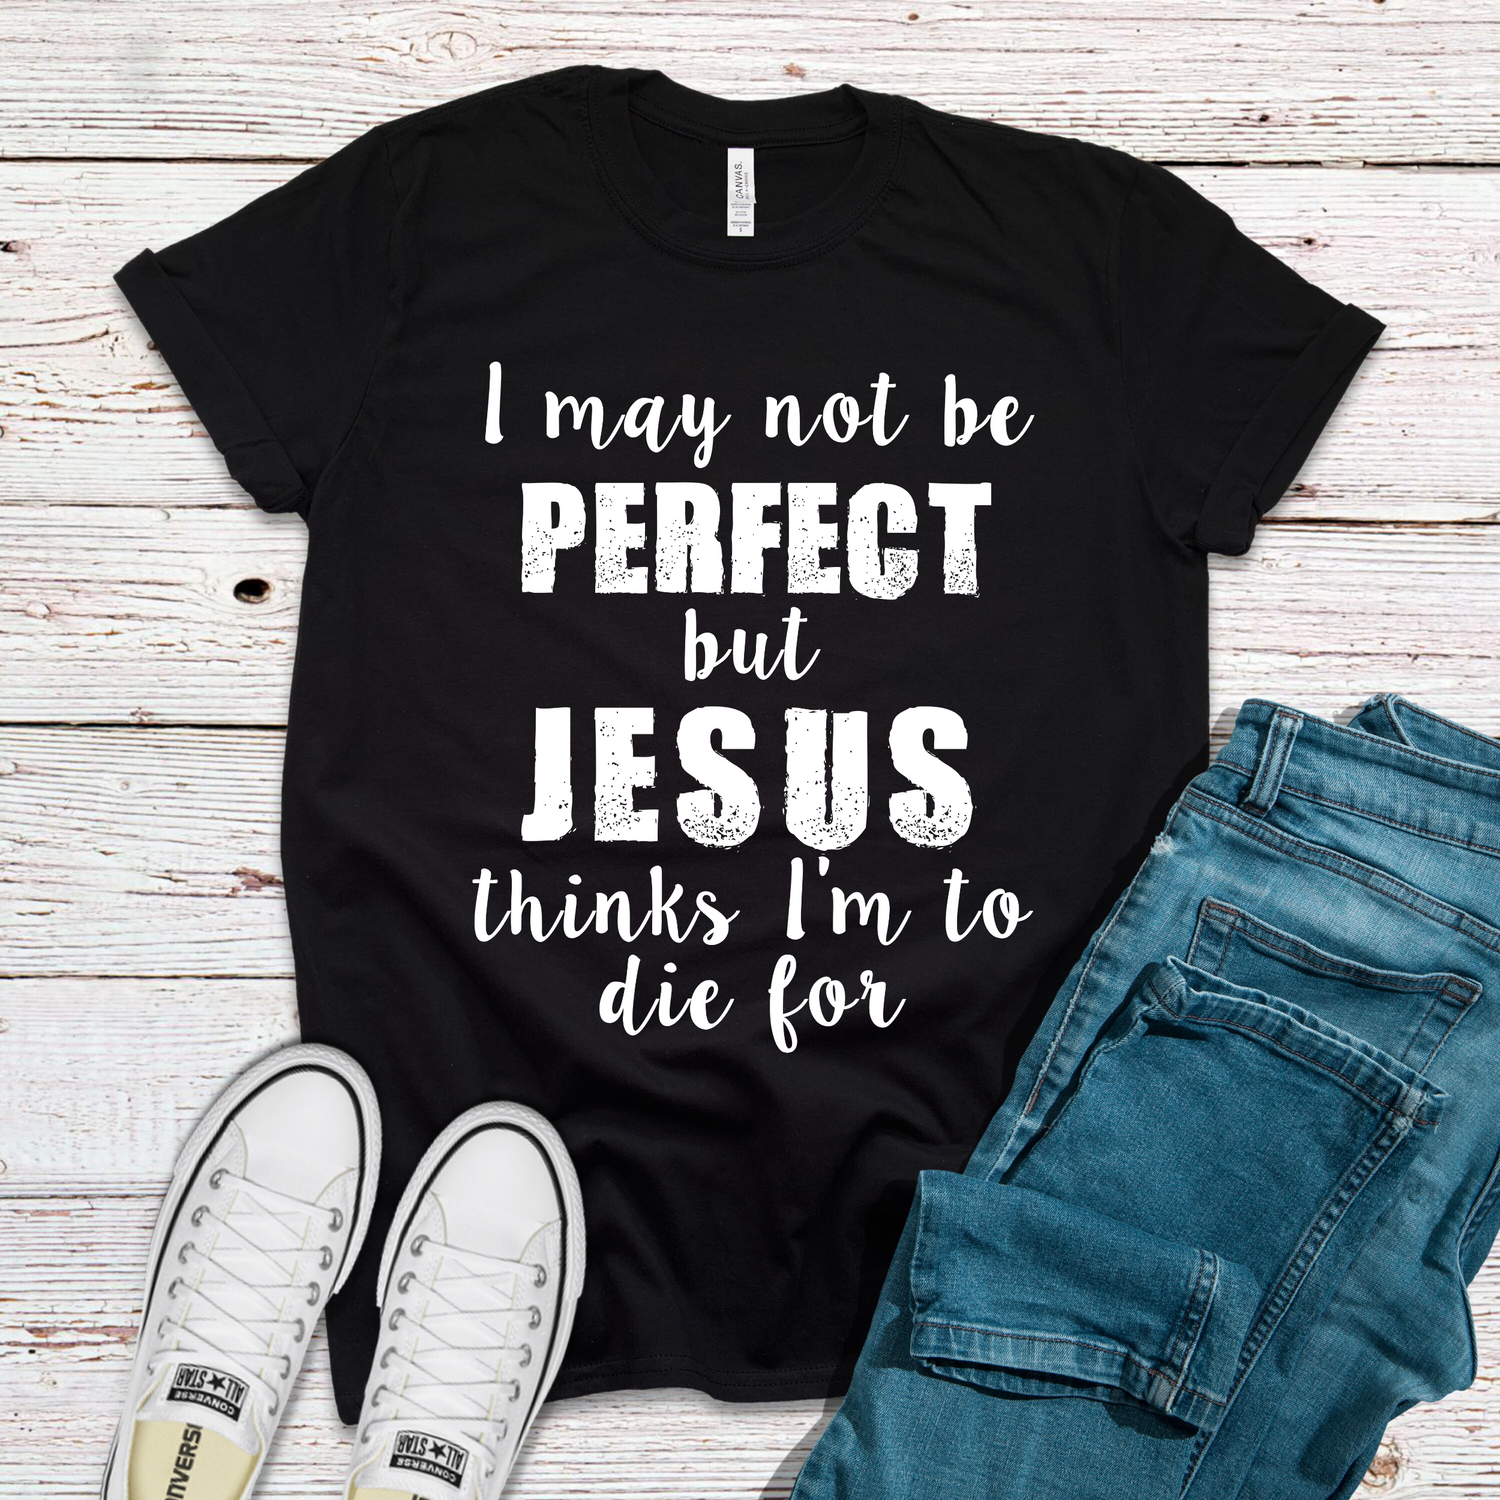 I May Not Be Perfect But Jesus Thinks I'm To Die For Shirt - Teegarb